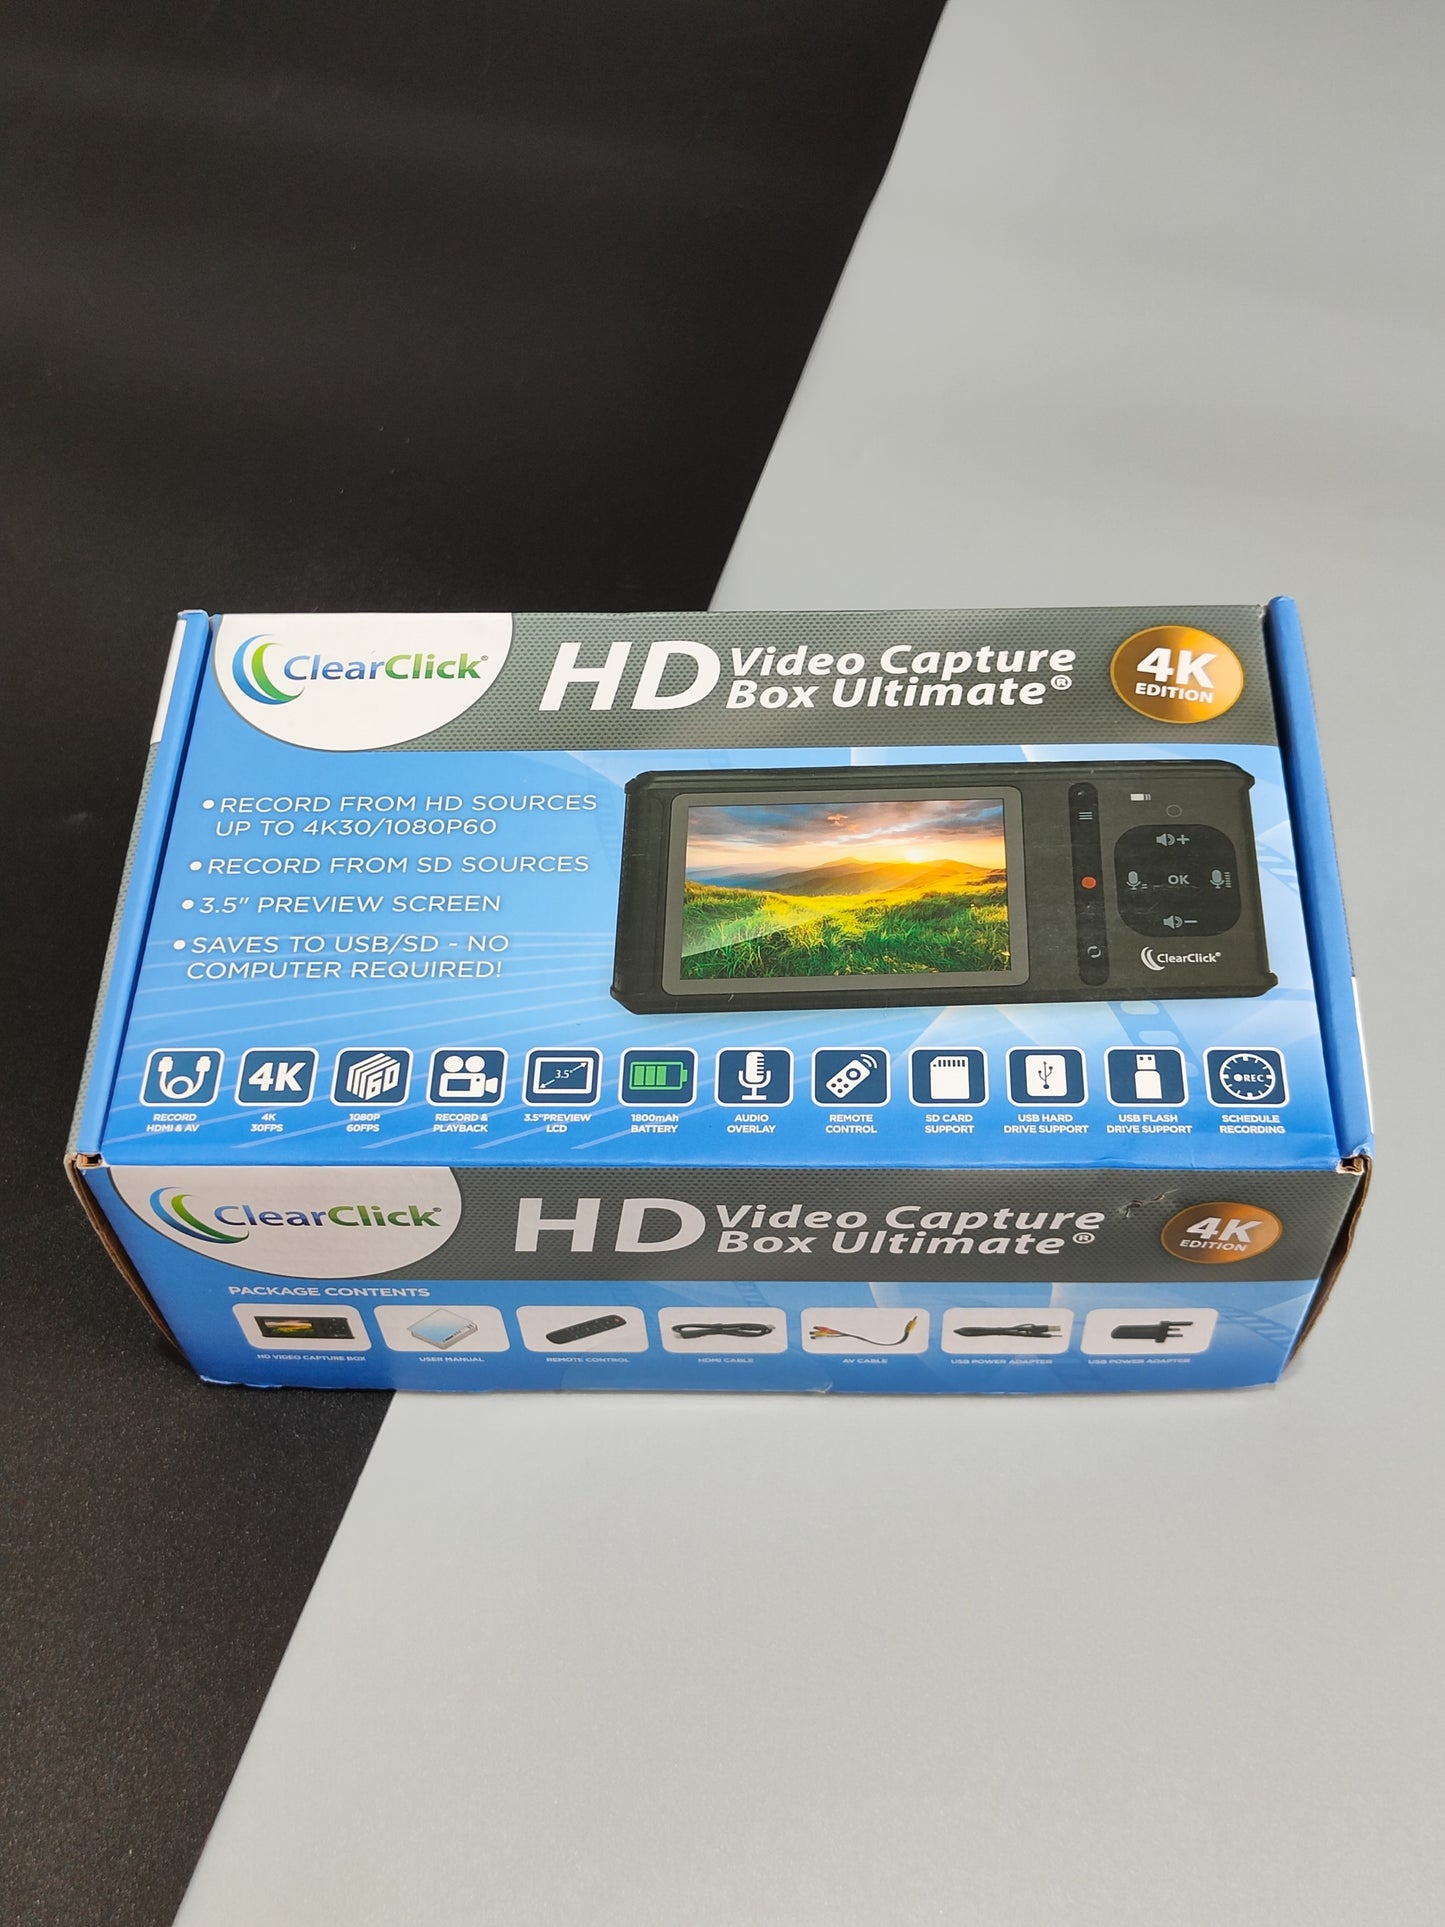 HD Video Capture Box Ultimate (4K Edition)